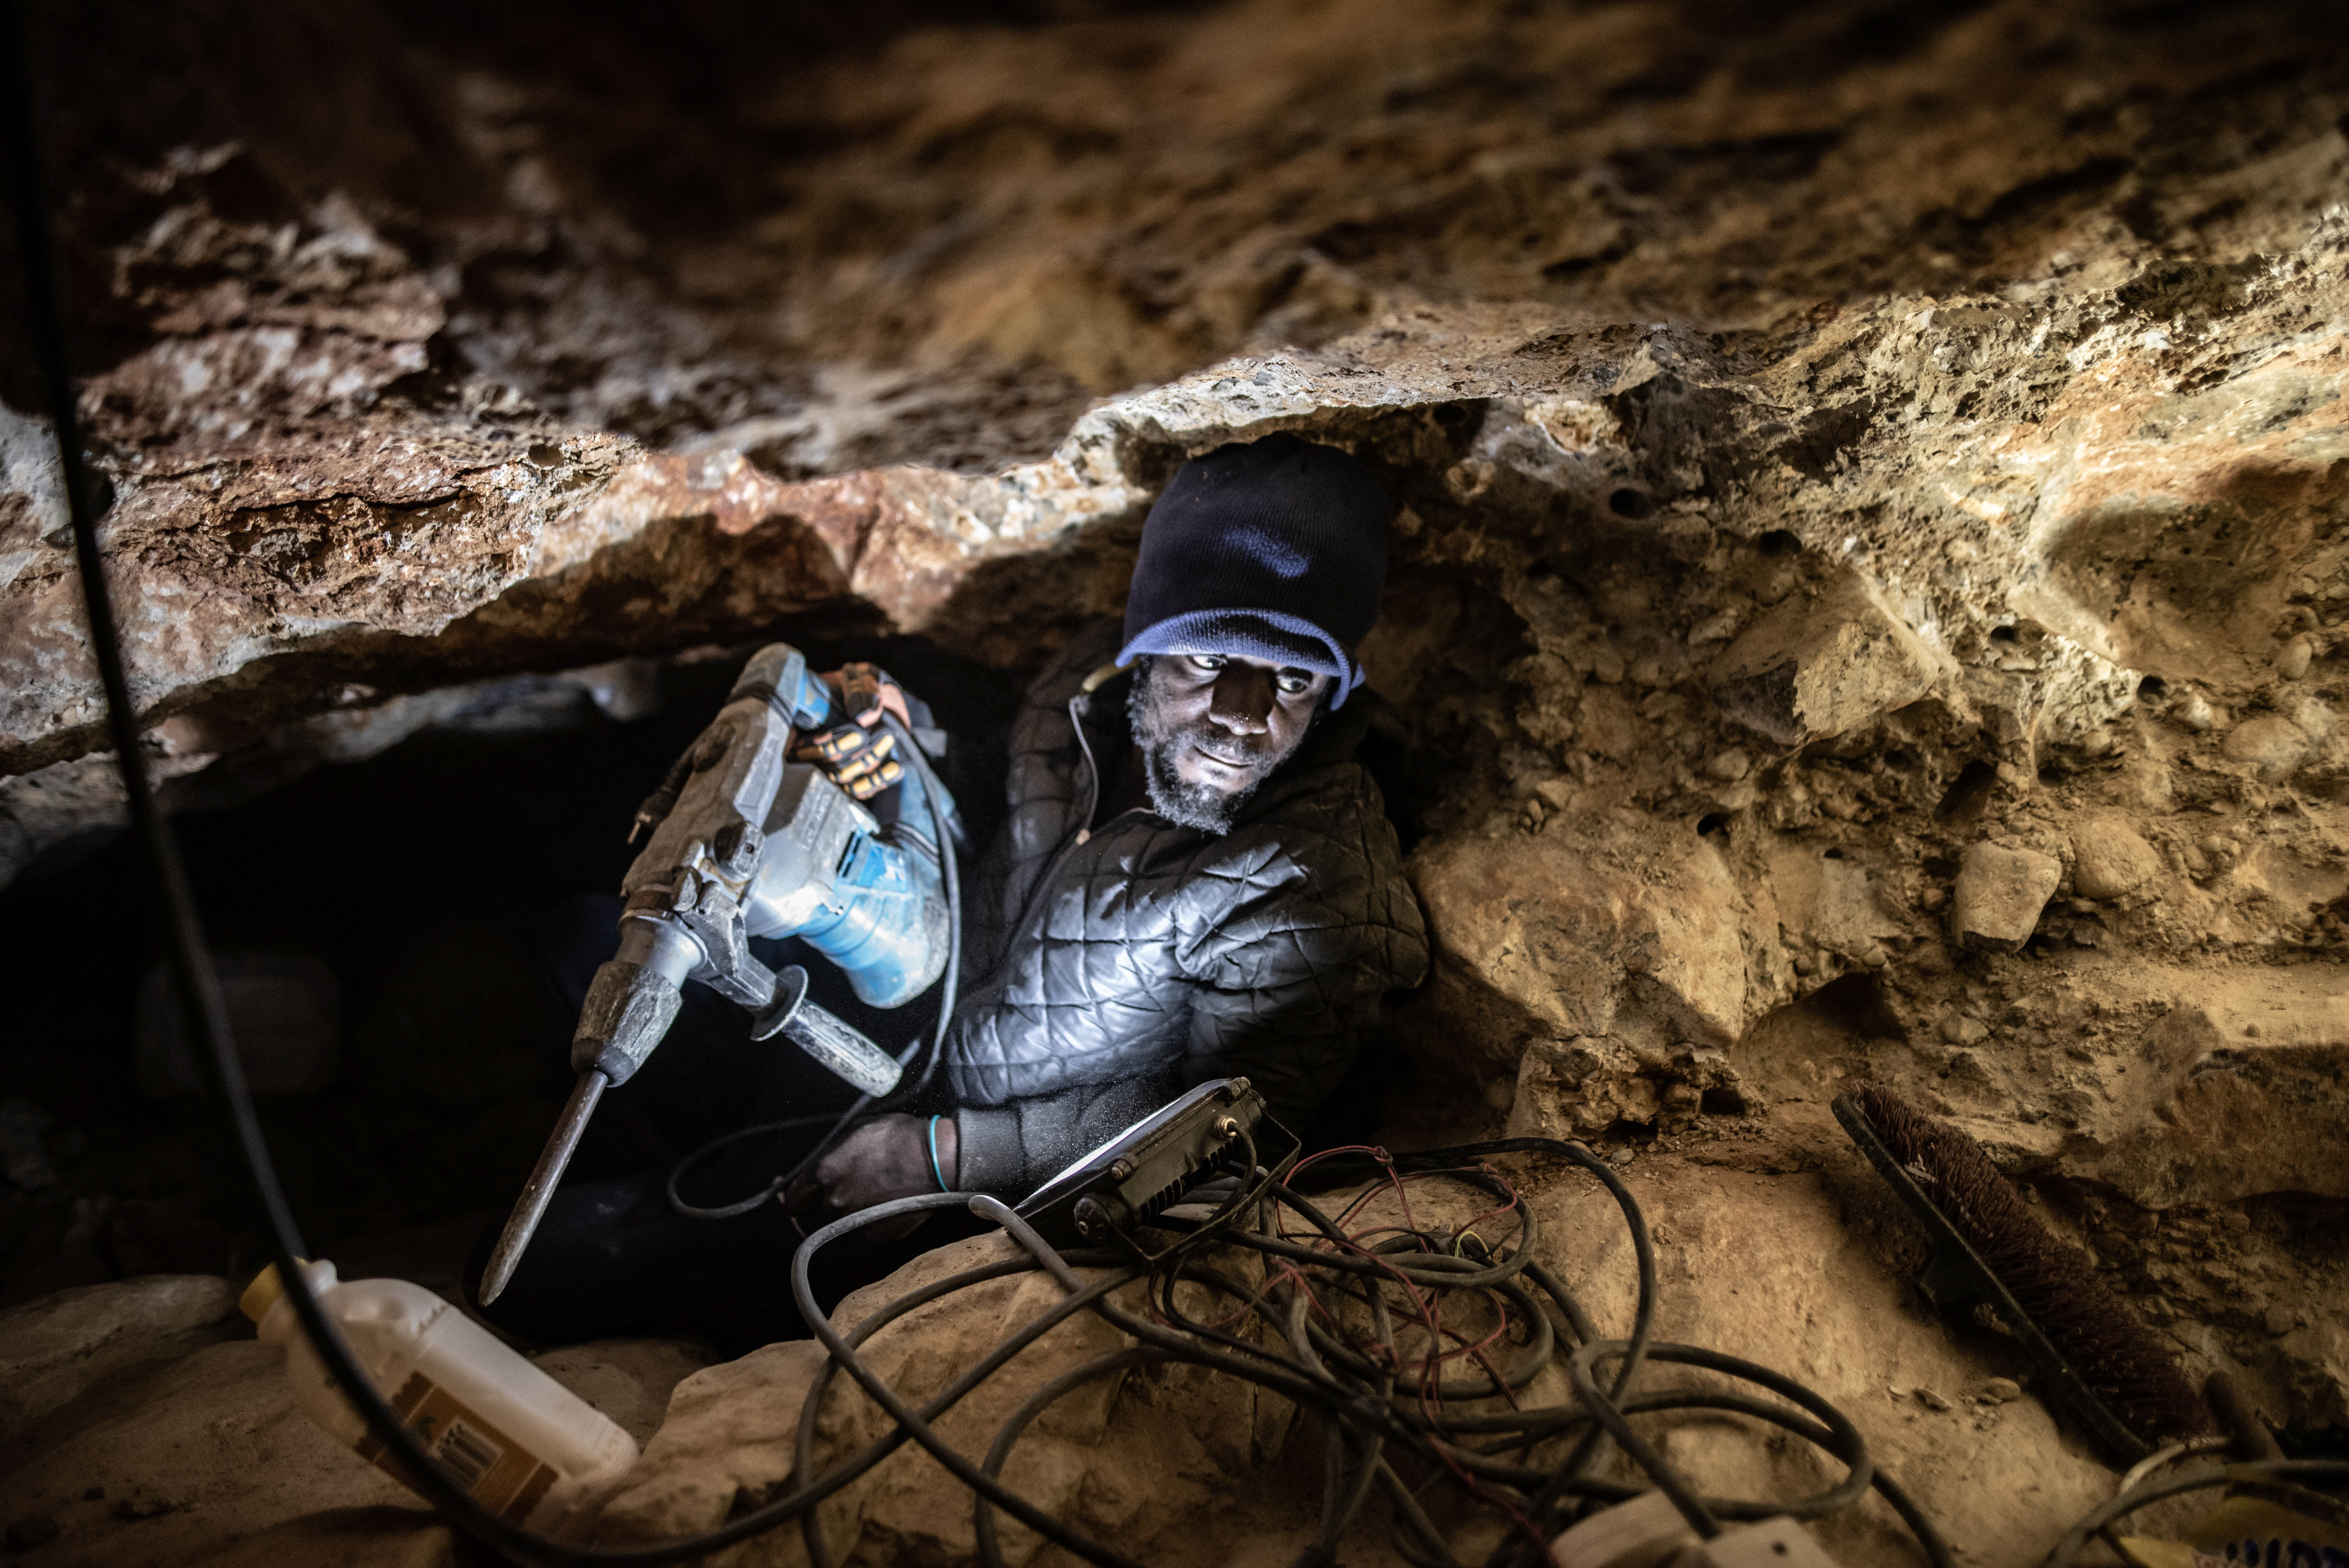 Diamond diggers in South Africa's deserted mines break the law — and risk  their lives - OPB